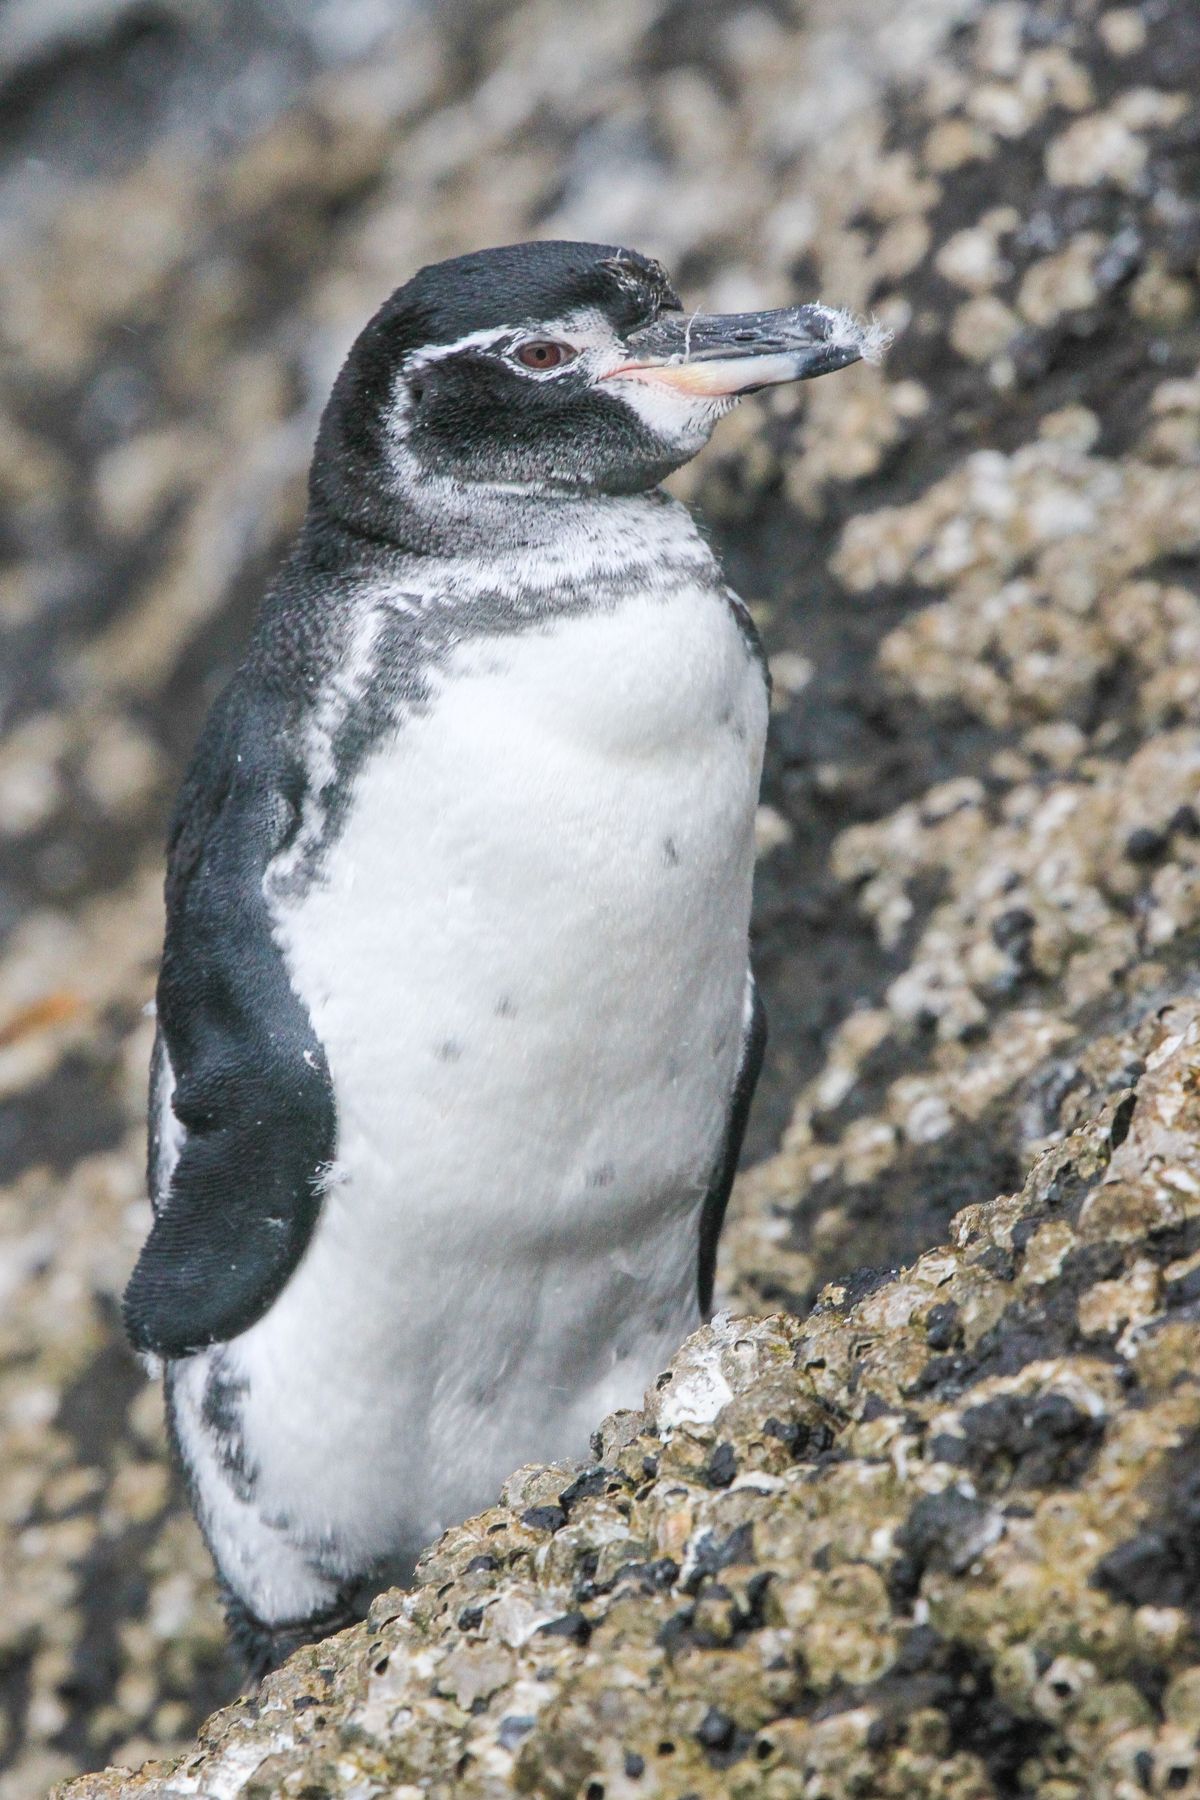 The rather solitary Galapagos Penguin